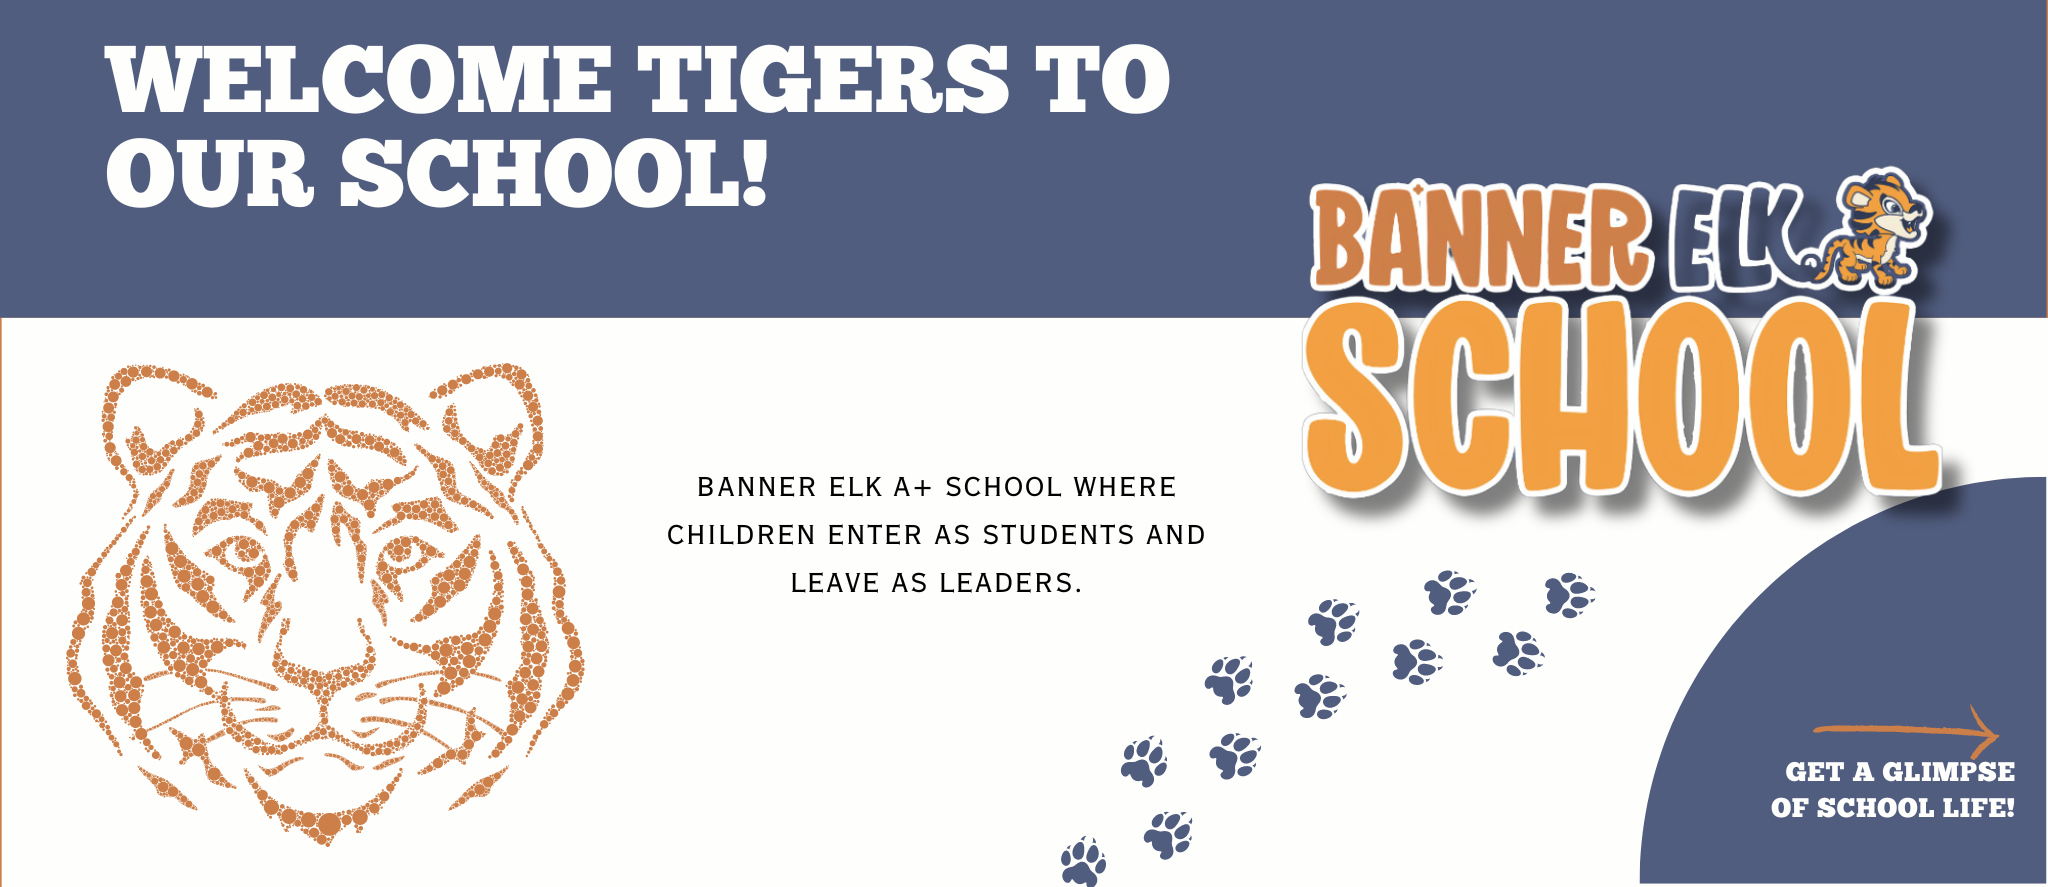 Welcome Tigers to our school!